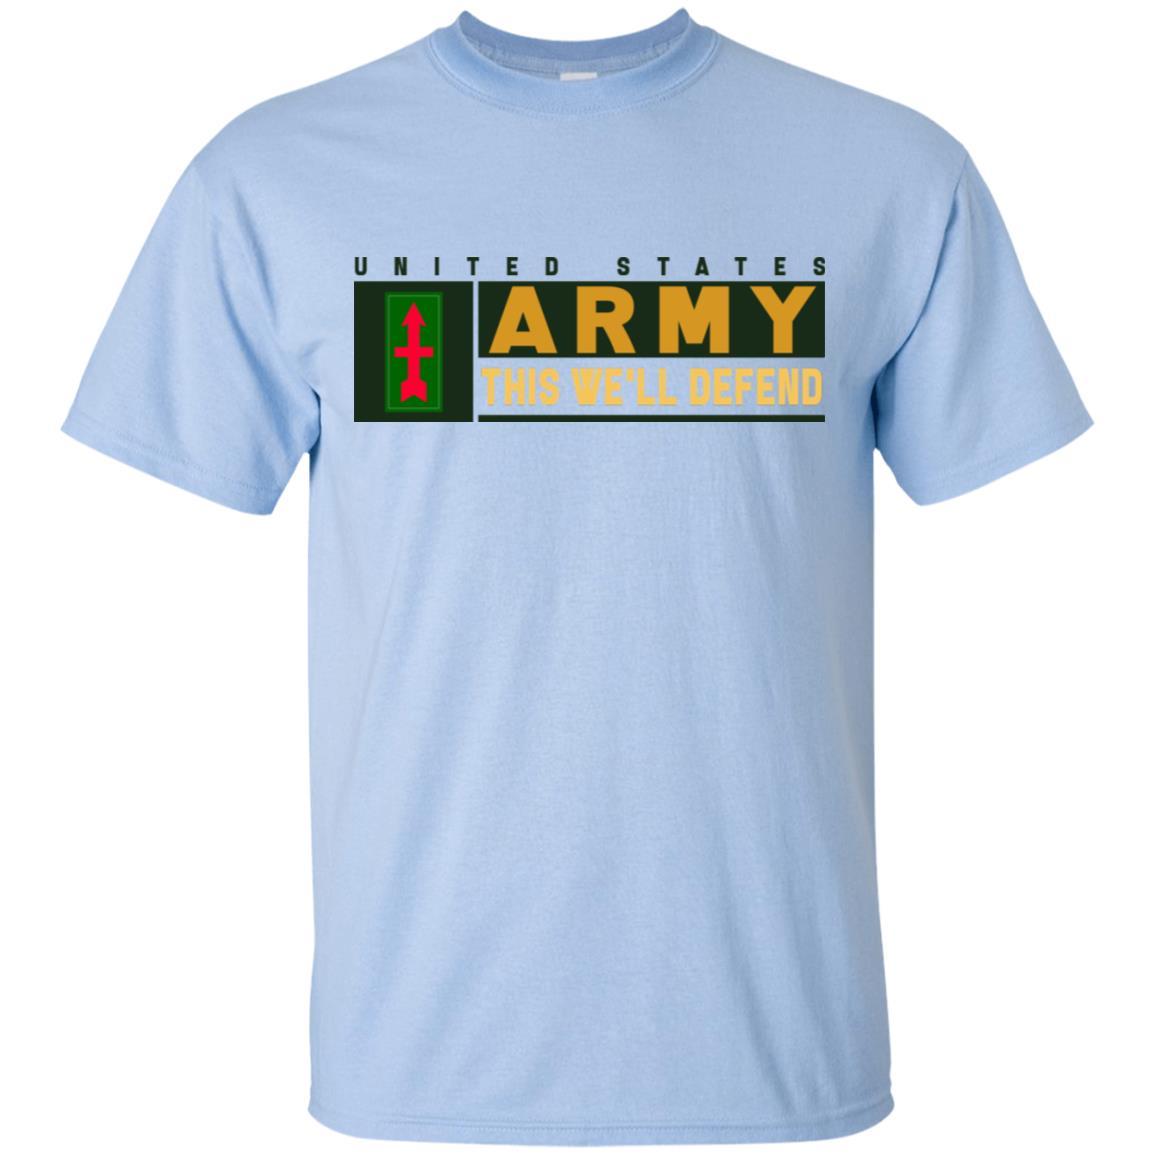 US Army 32ND INFANTRY BRIGADE COMBAT TEAM CSIB- This We'll Defend T-Shirt On Front For Men-TShirt-Army-Veterans Nation